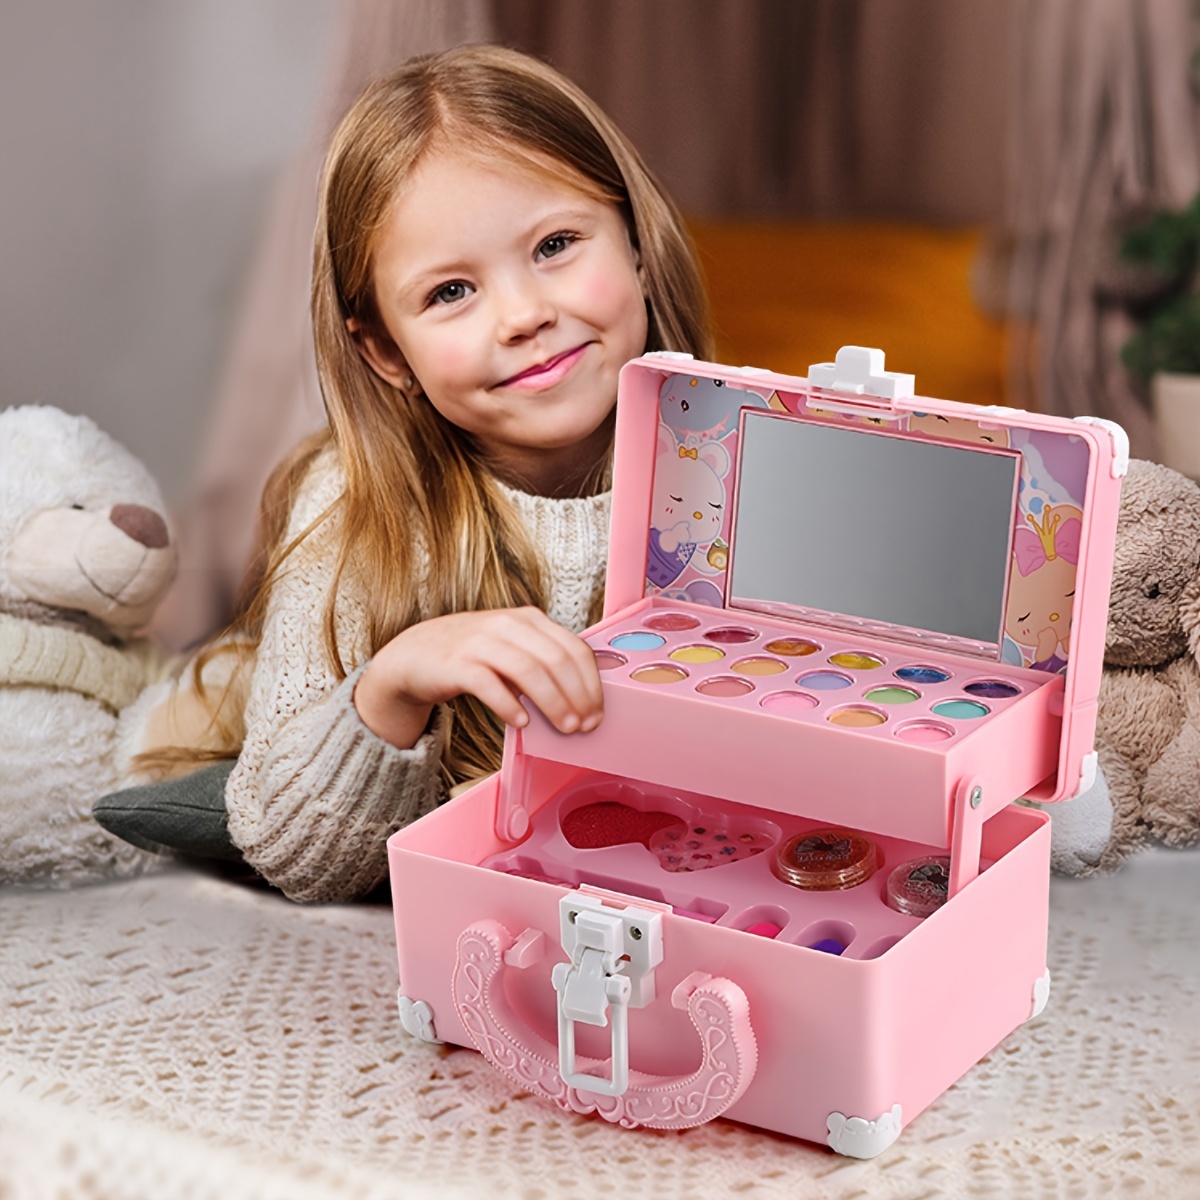 Kids Real Makeup Kit for Little Girls:with Blue Dream Bag - Real, Non  Toxic, Washable Make Up Dress Up Toy - Gift for Toddler Young Children  Pretend Play Set Vanity for Ages 3 4 5 6 7 8 9 10 Years Old : Toys & Games  